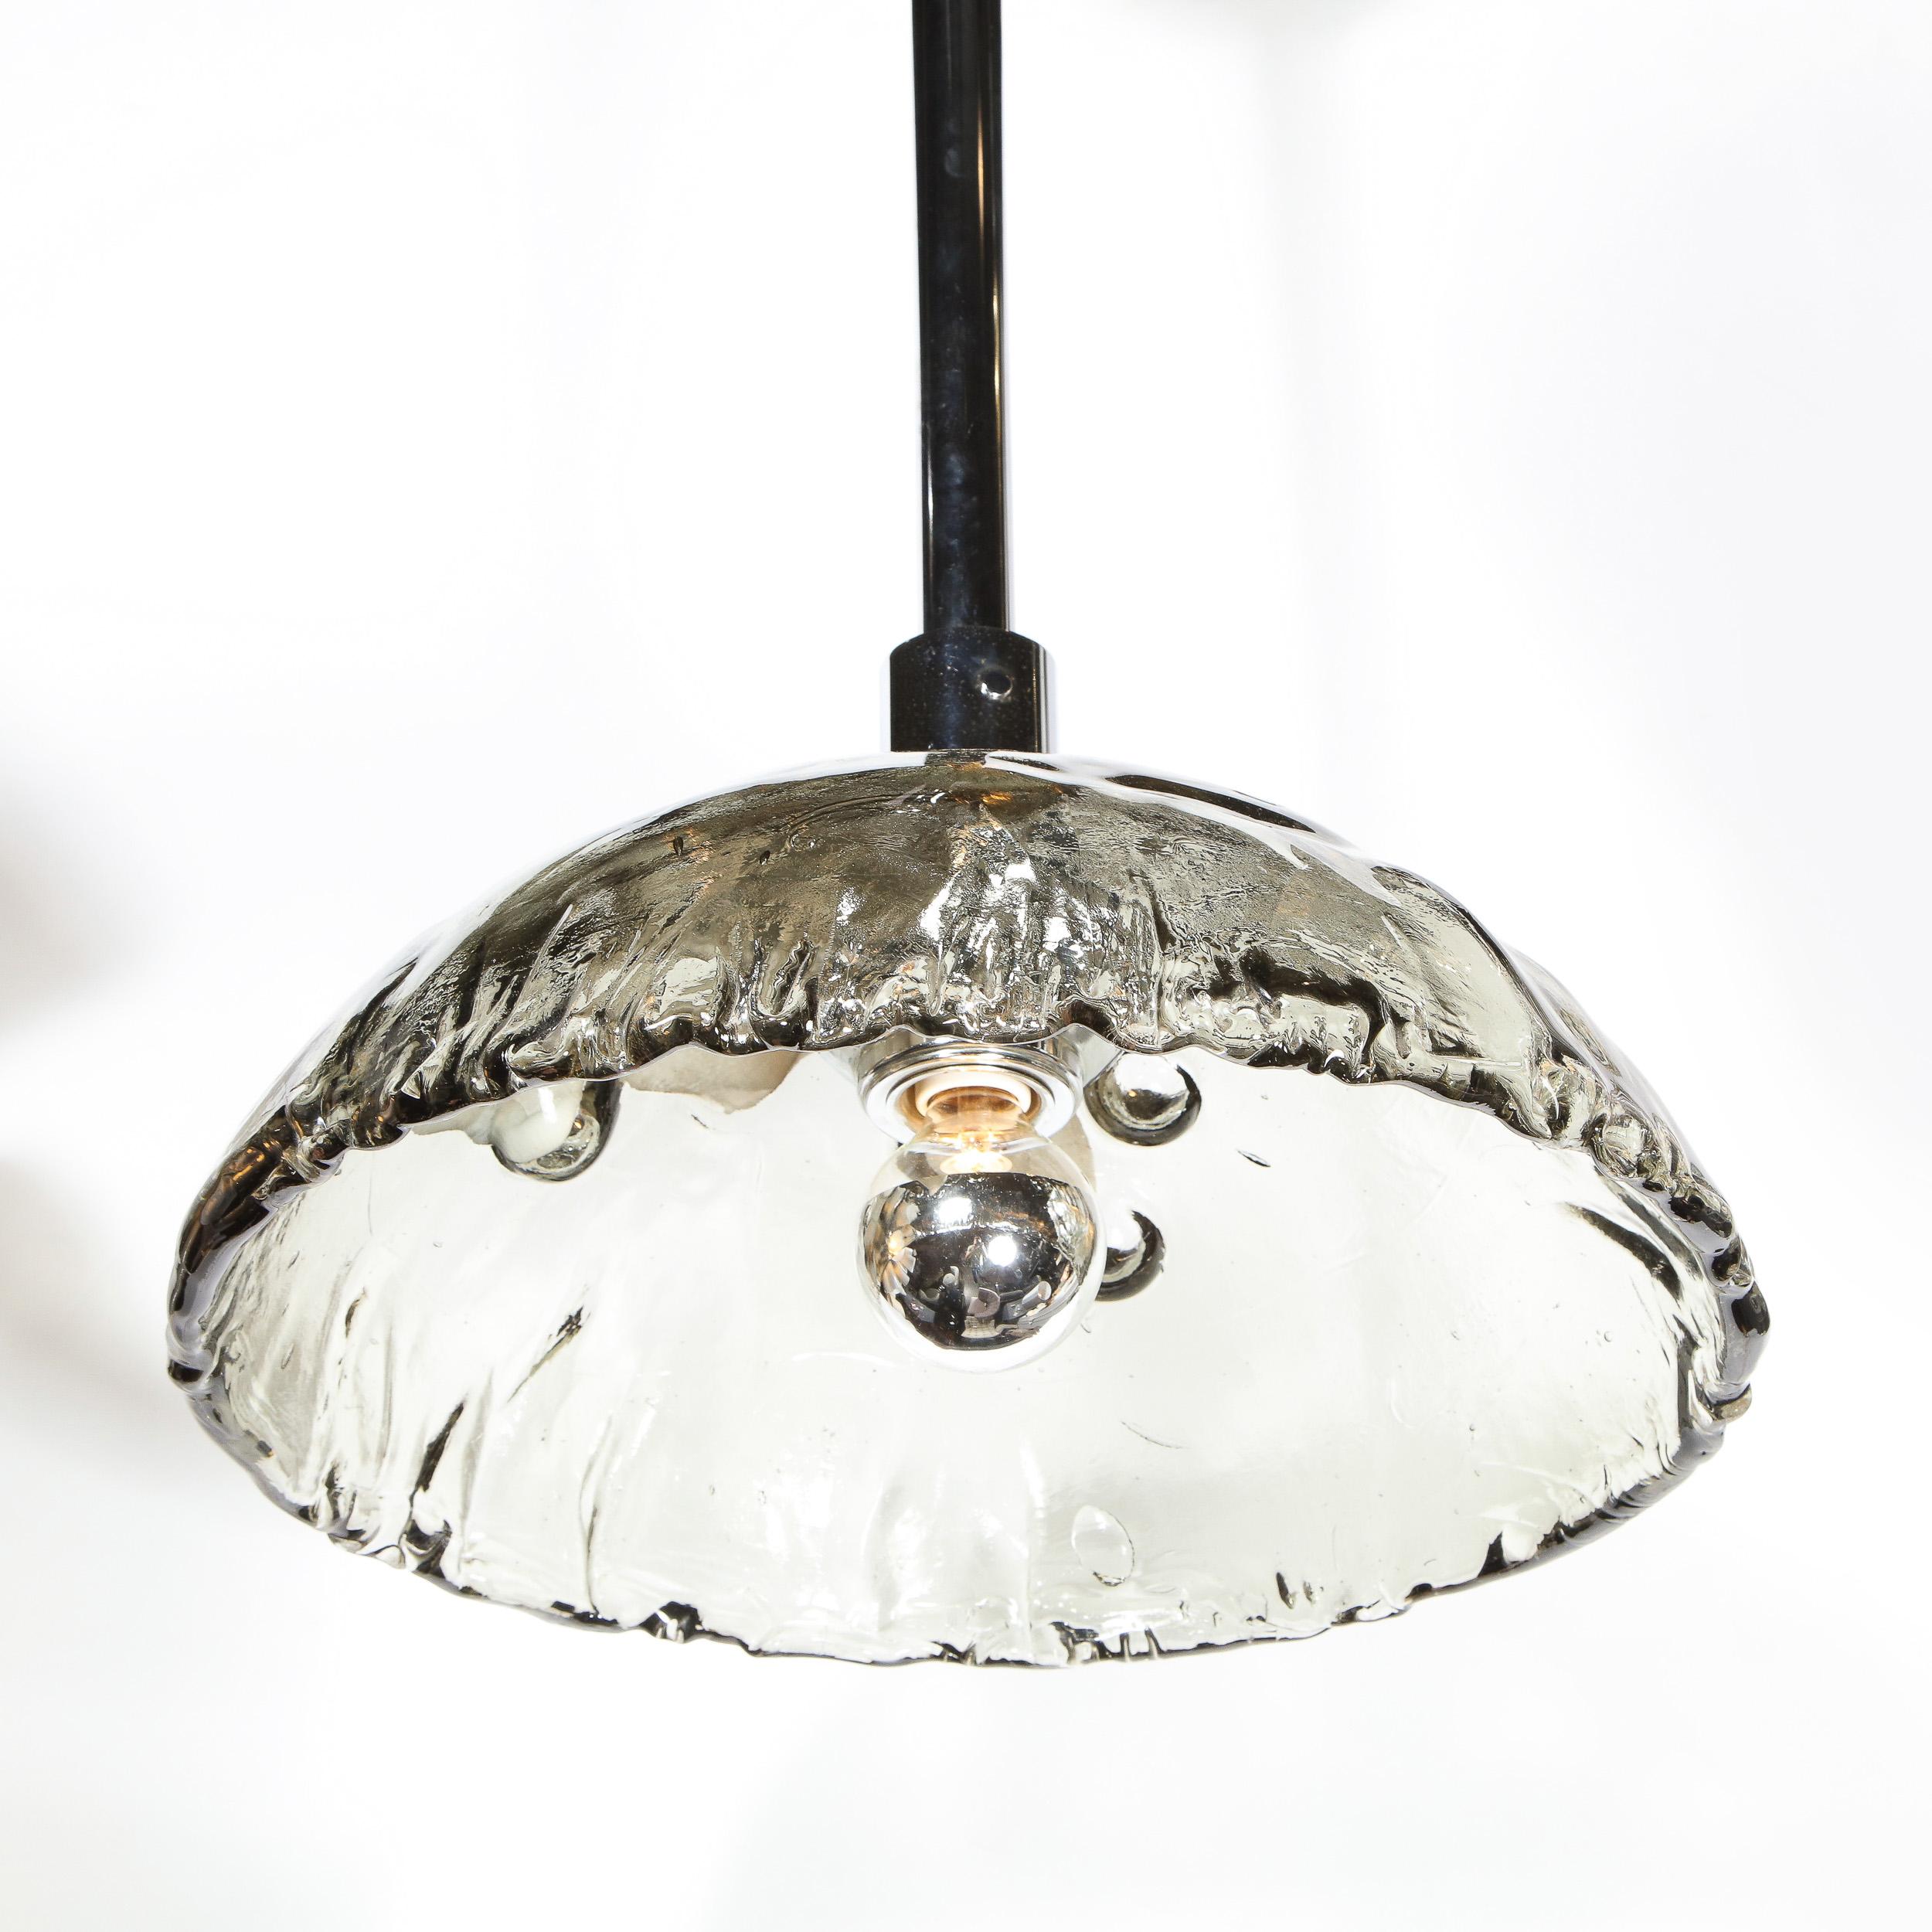 This elegant Mid-Century Modern chandelier was realized in Murano, Italy- the island off the coast of Venice renowned for centuries for its superlative glass production- by the storied atelier of Mazzega, circa 1970. The chandelier features a convex